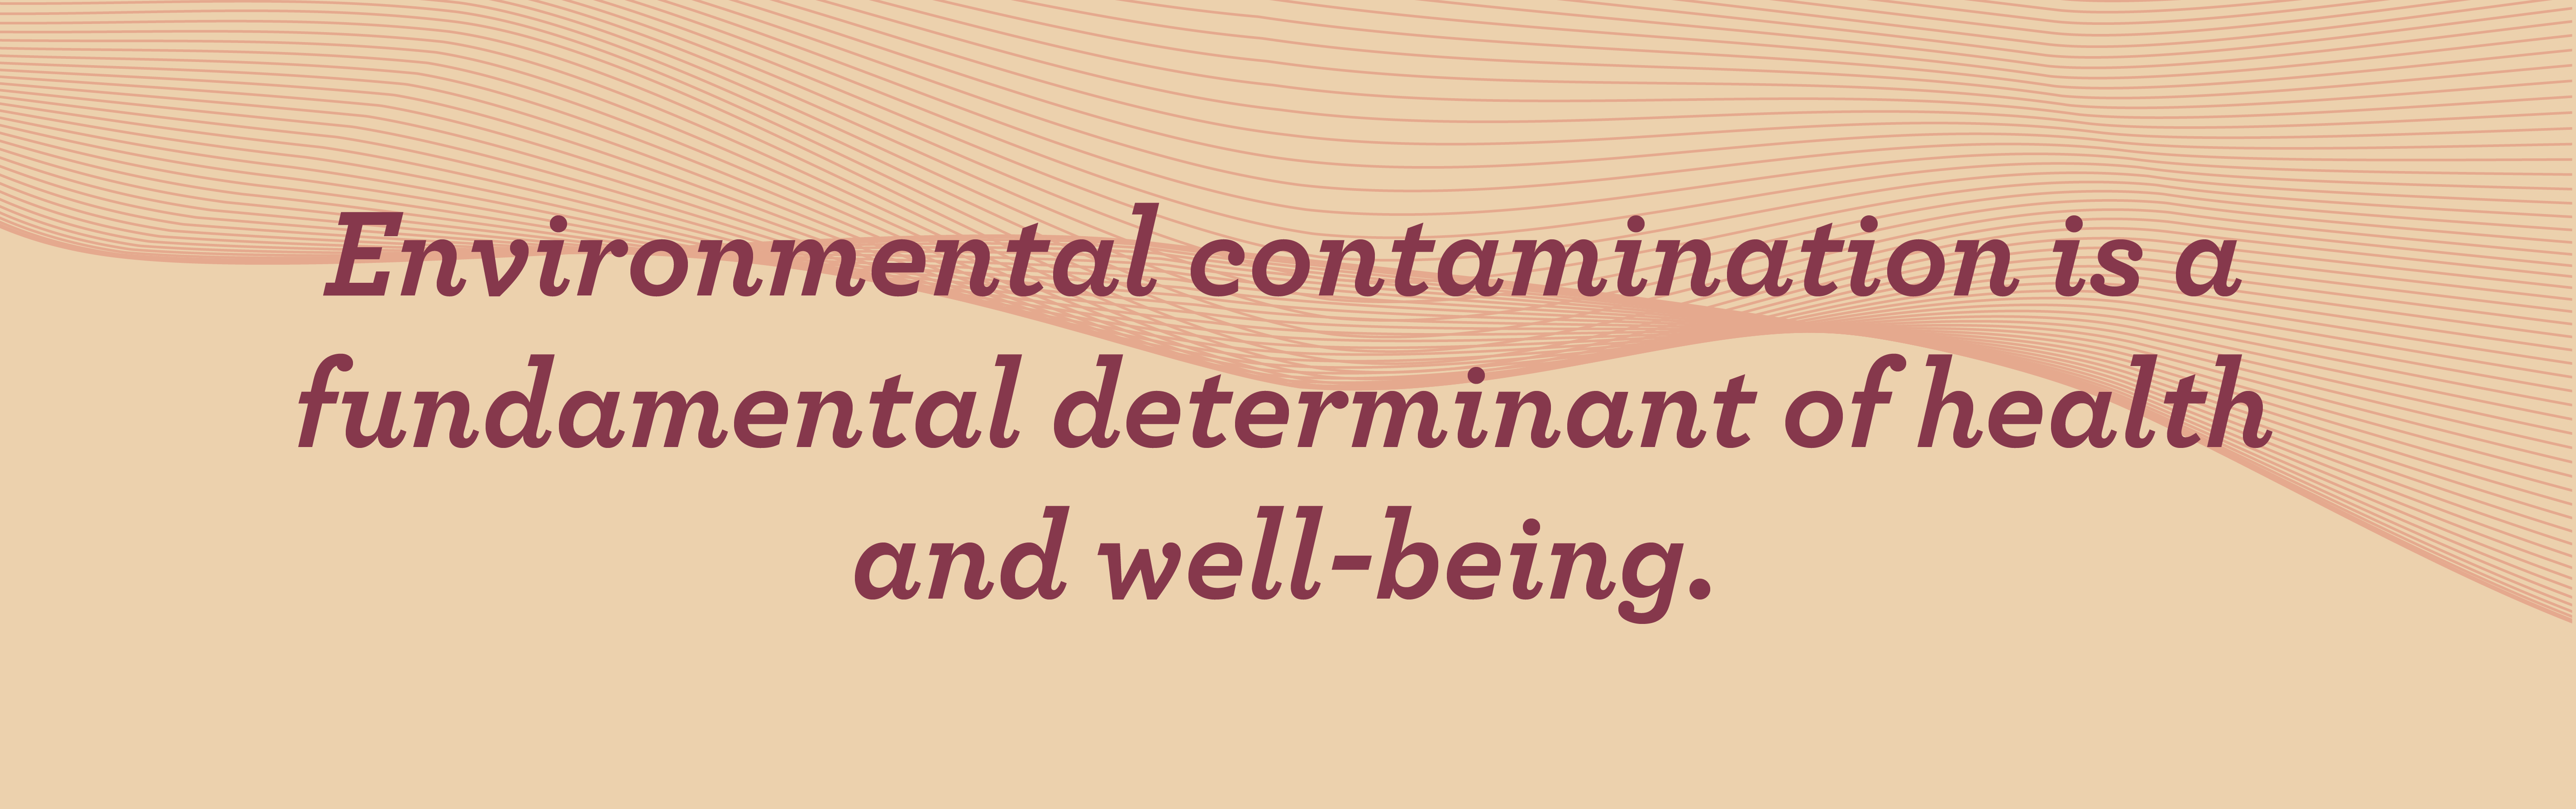 Environmental contamination is a fundamental determinant of health and well-being.